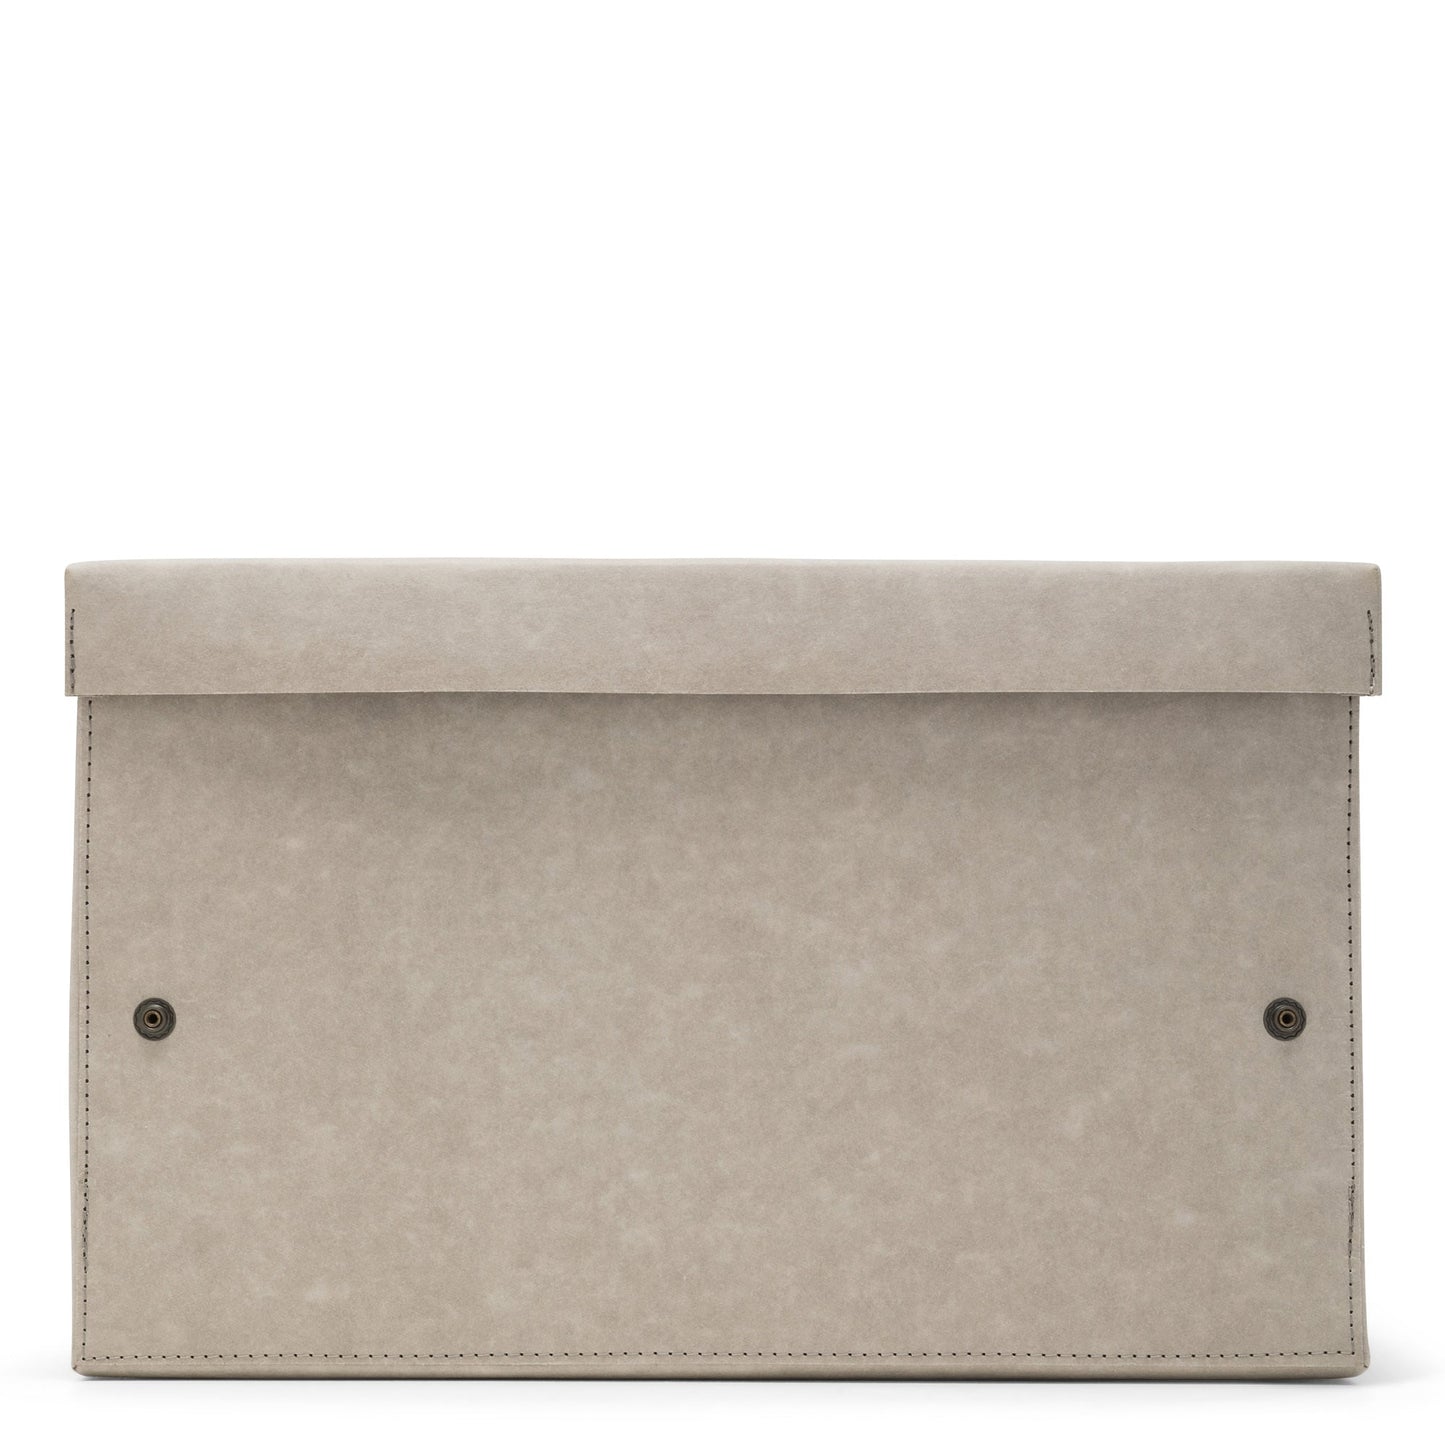 A large washable paper box is shown in grey from a side angle.